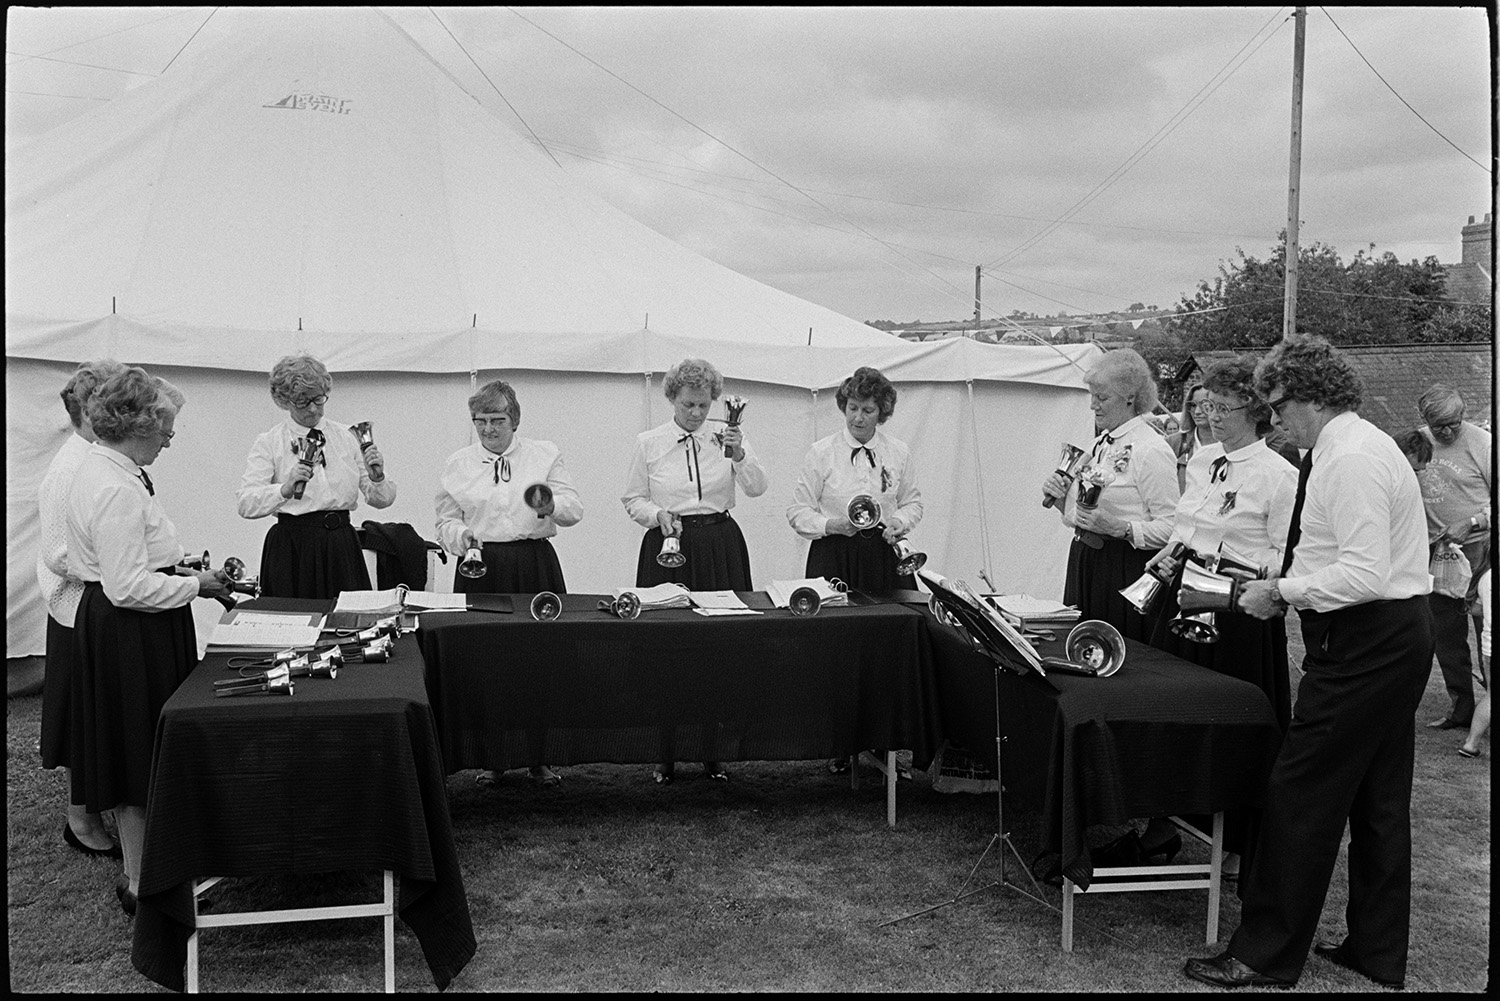 Fete with stalls, people having tea, looking at view, hand bell ringers. 
[The Ashreigney Hand bell ringers performing at a fete at Little Silver, High Bickington. A marquee can be seen behind them.]